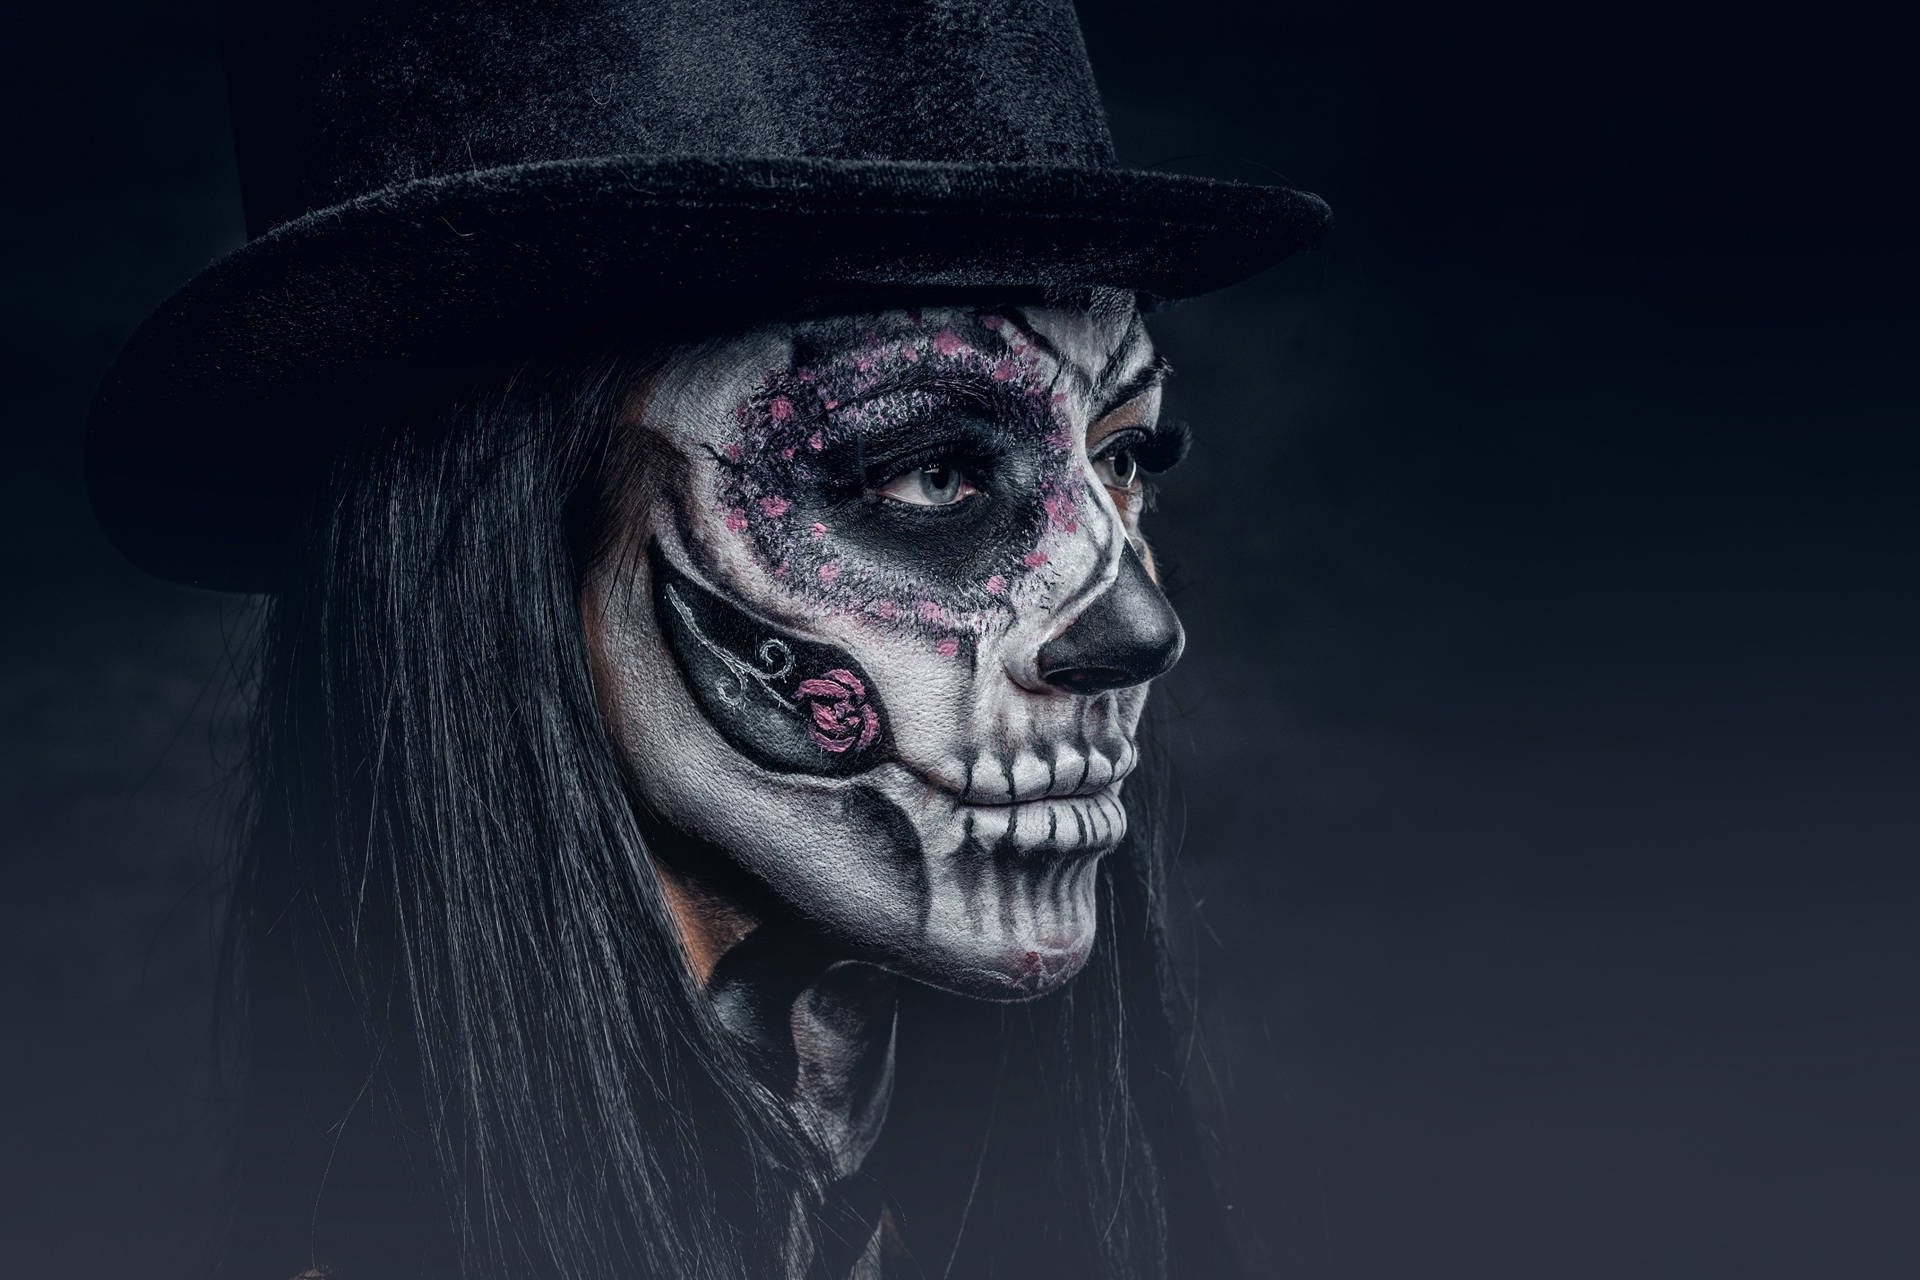 A Mysterious Sugar Skull Person In A Tophat